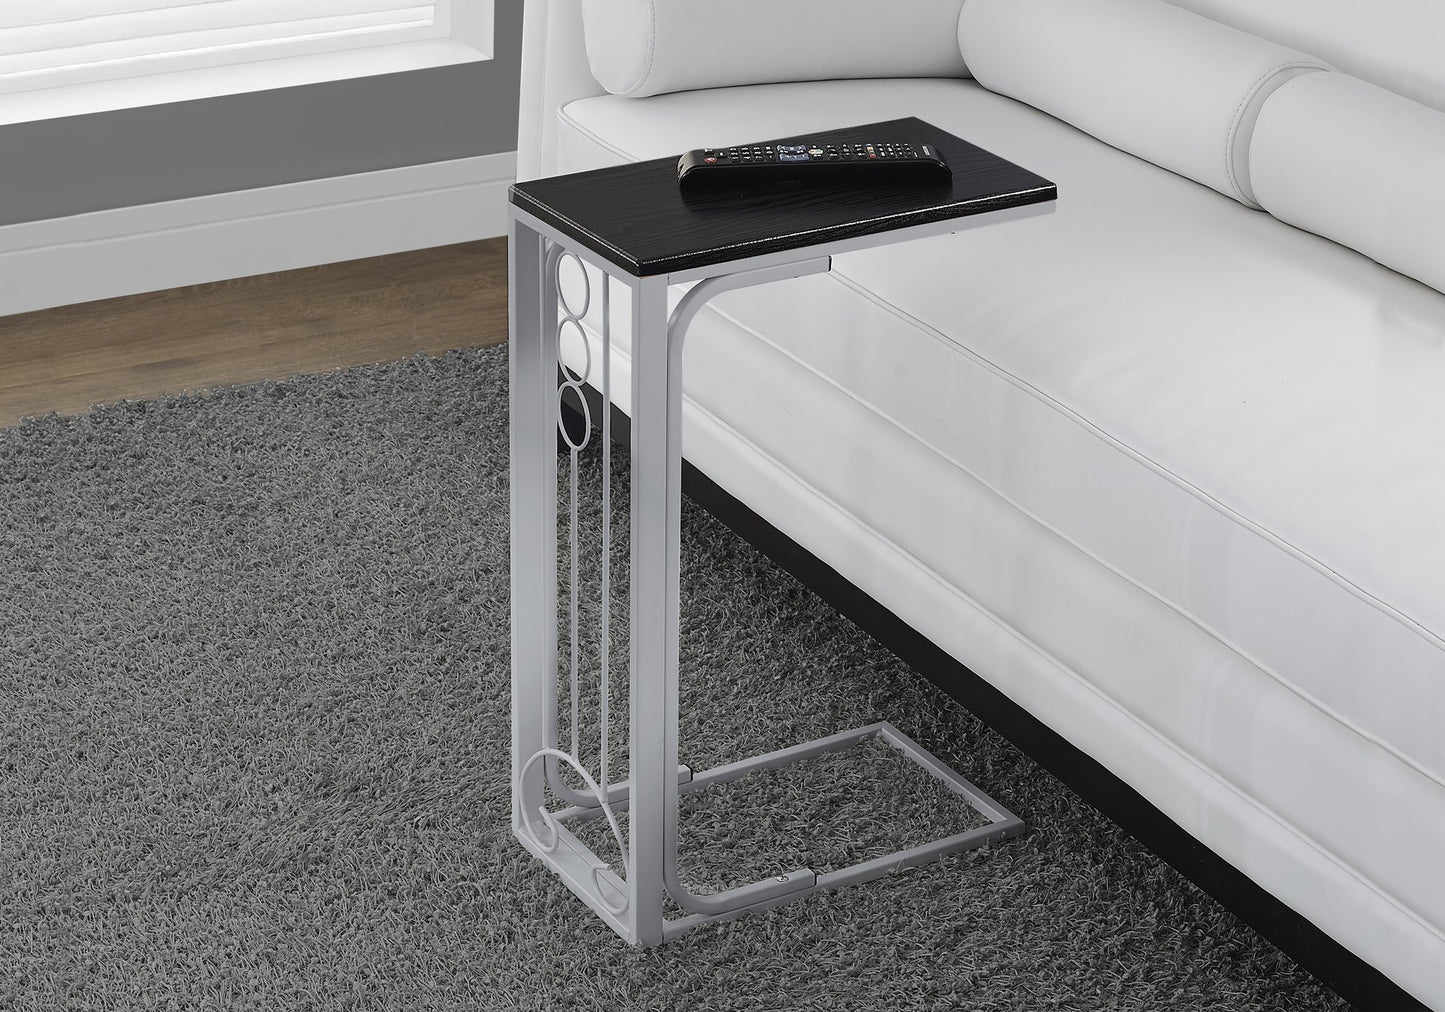 CherryWhite MDF Top and Metal Base Accent Table